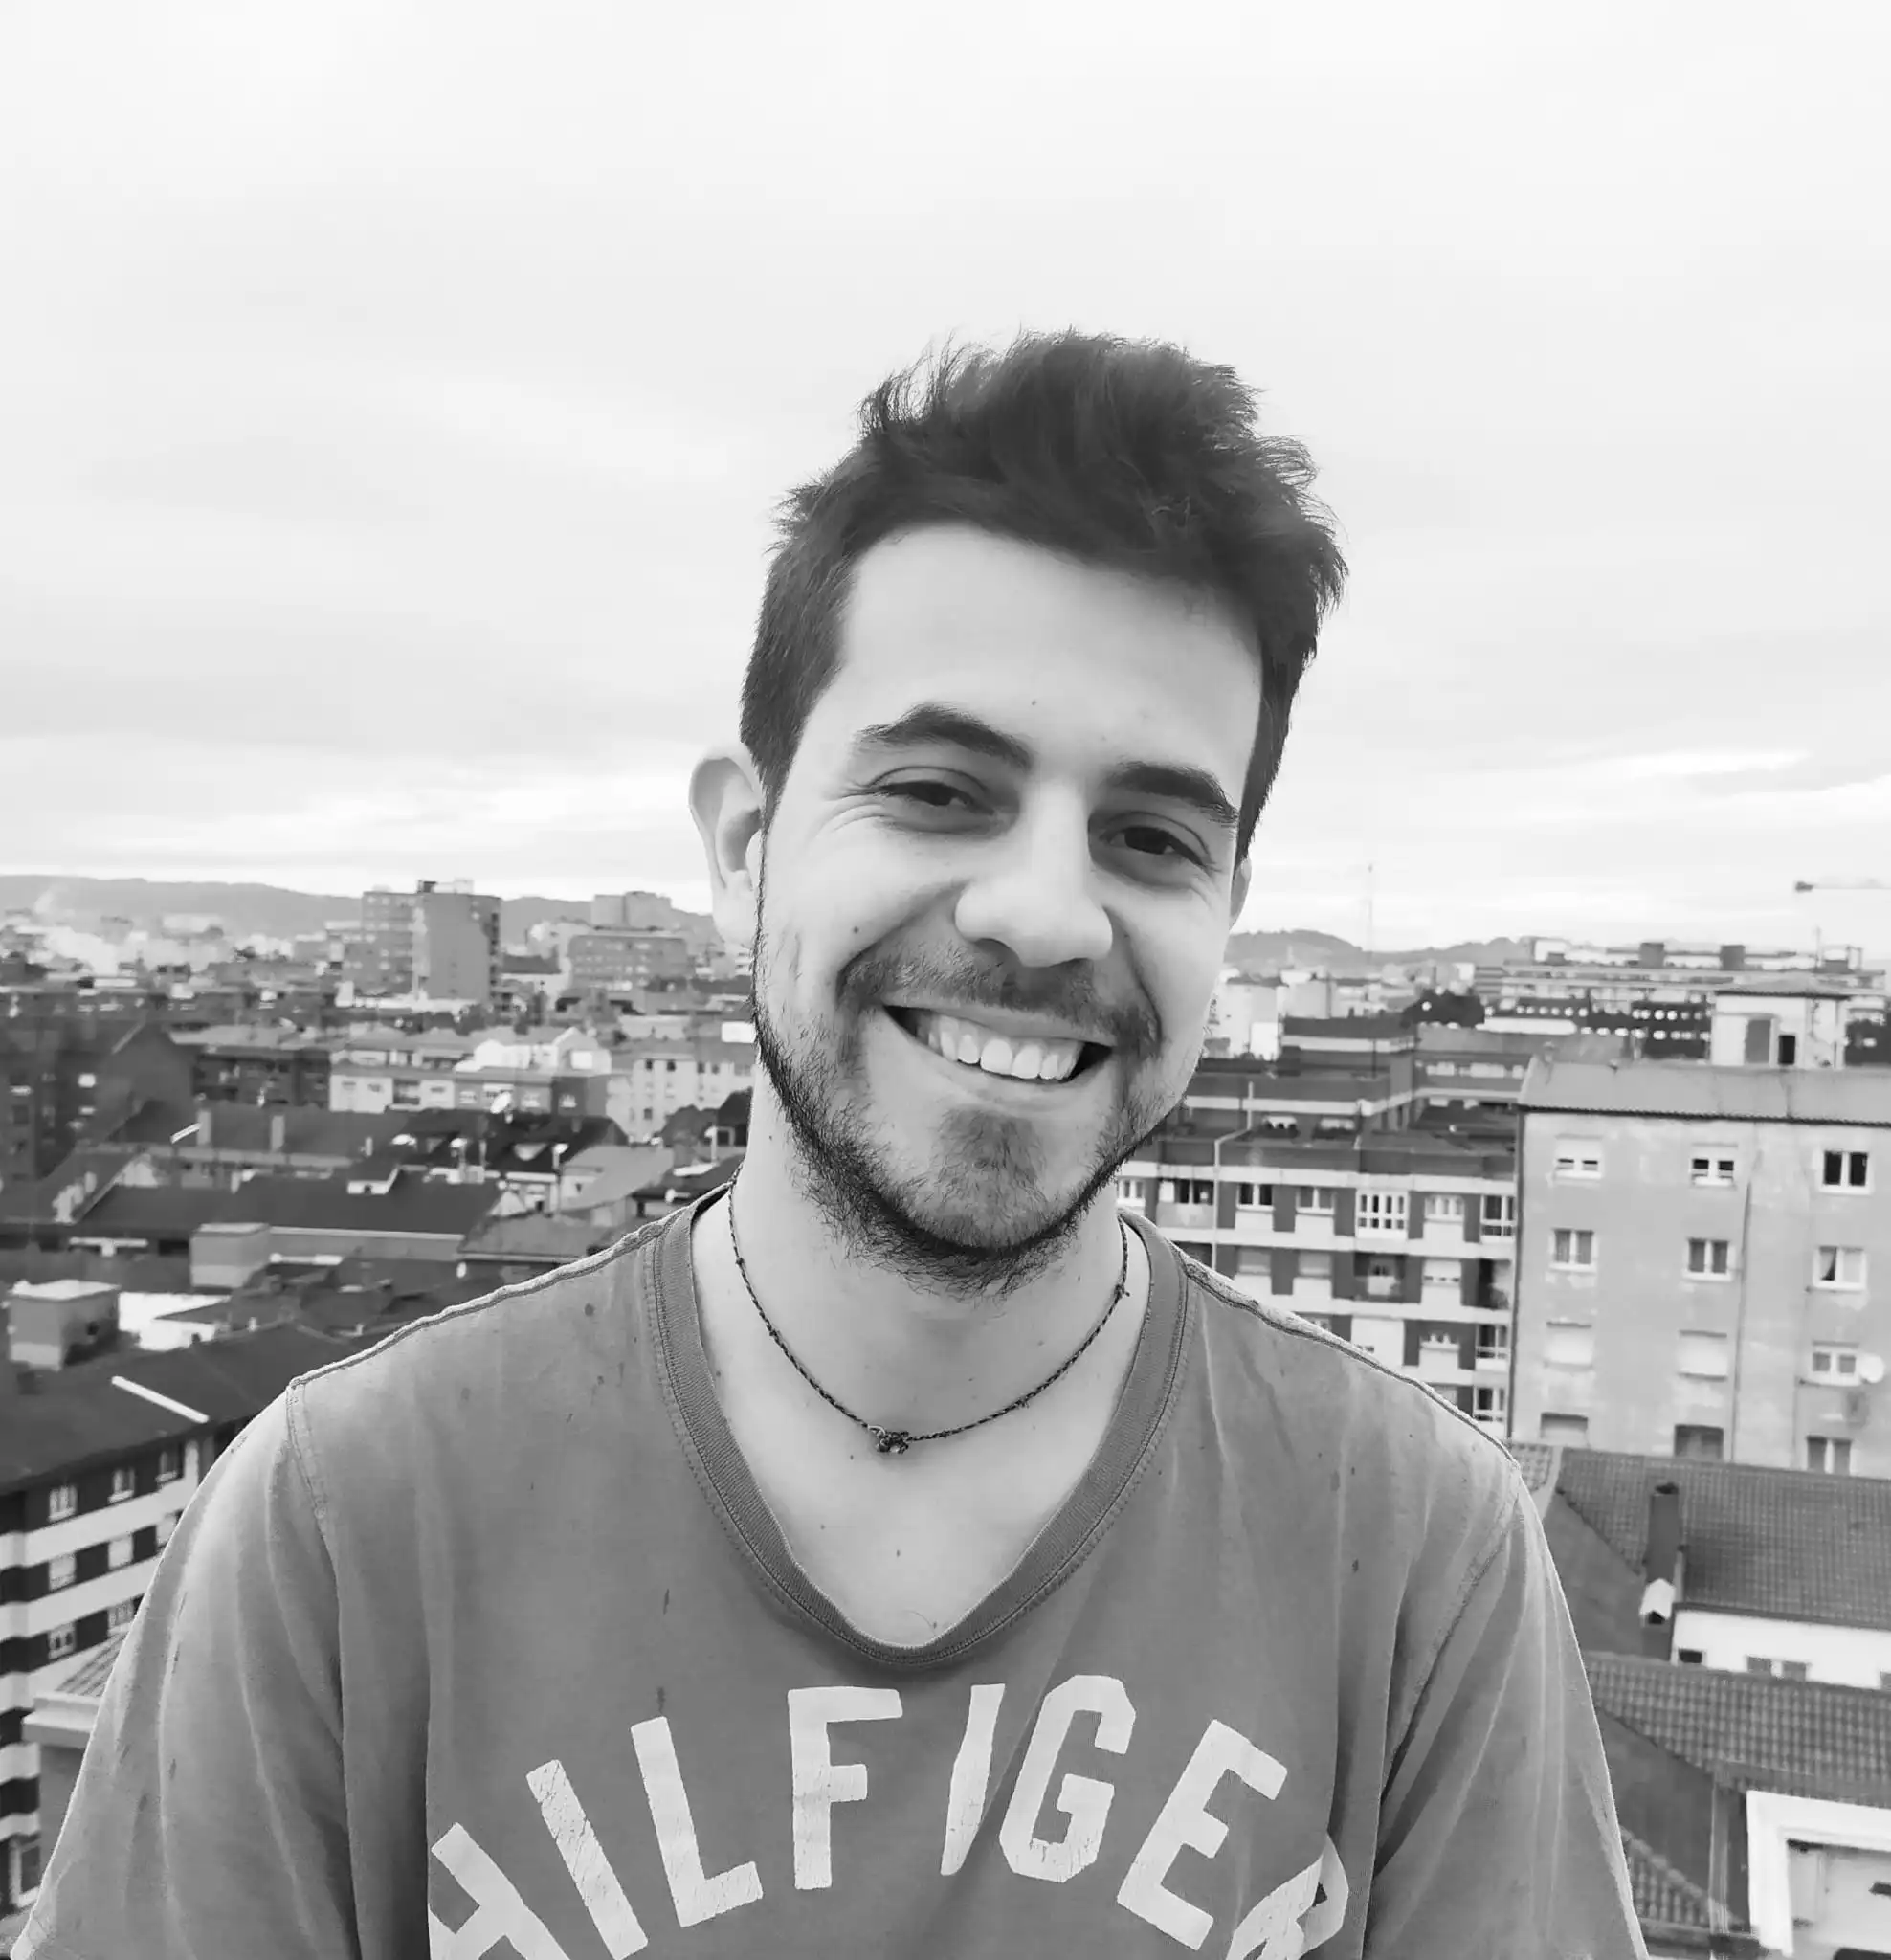 Portrait photo of myself on a top roof in Gijón, Spain